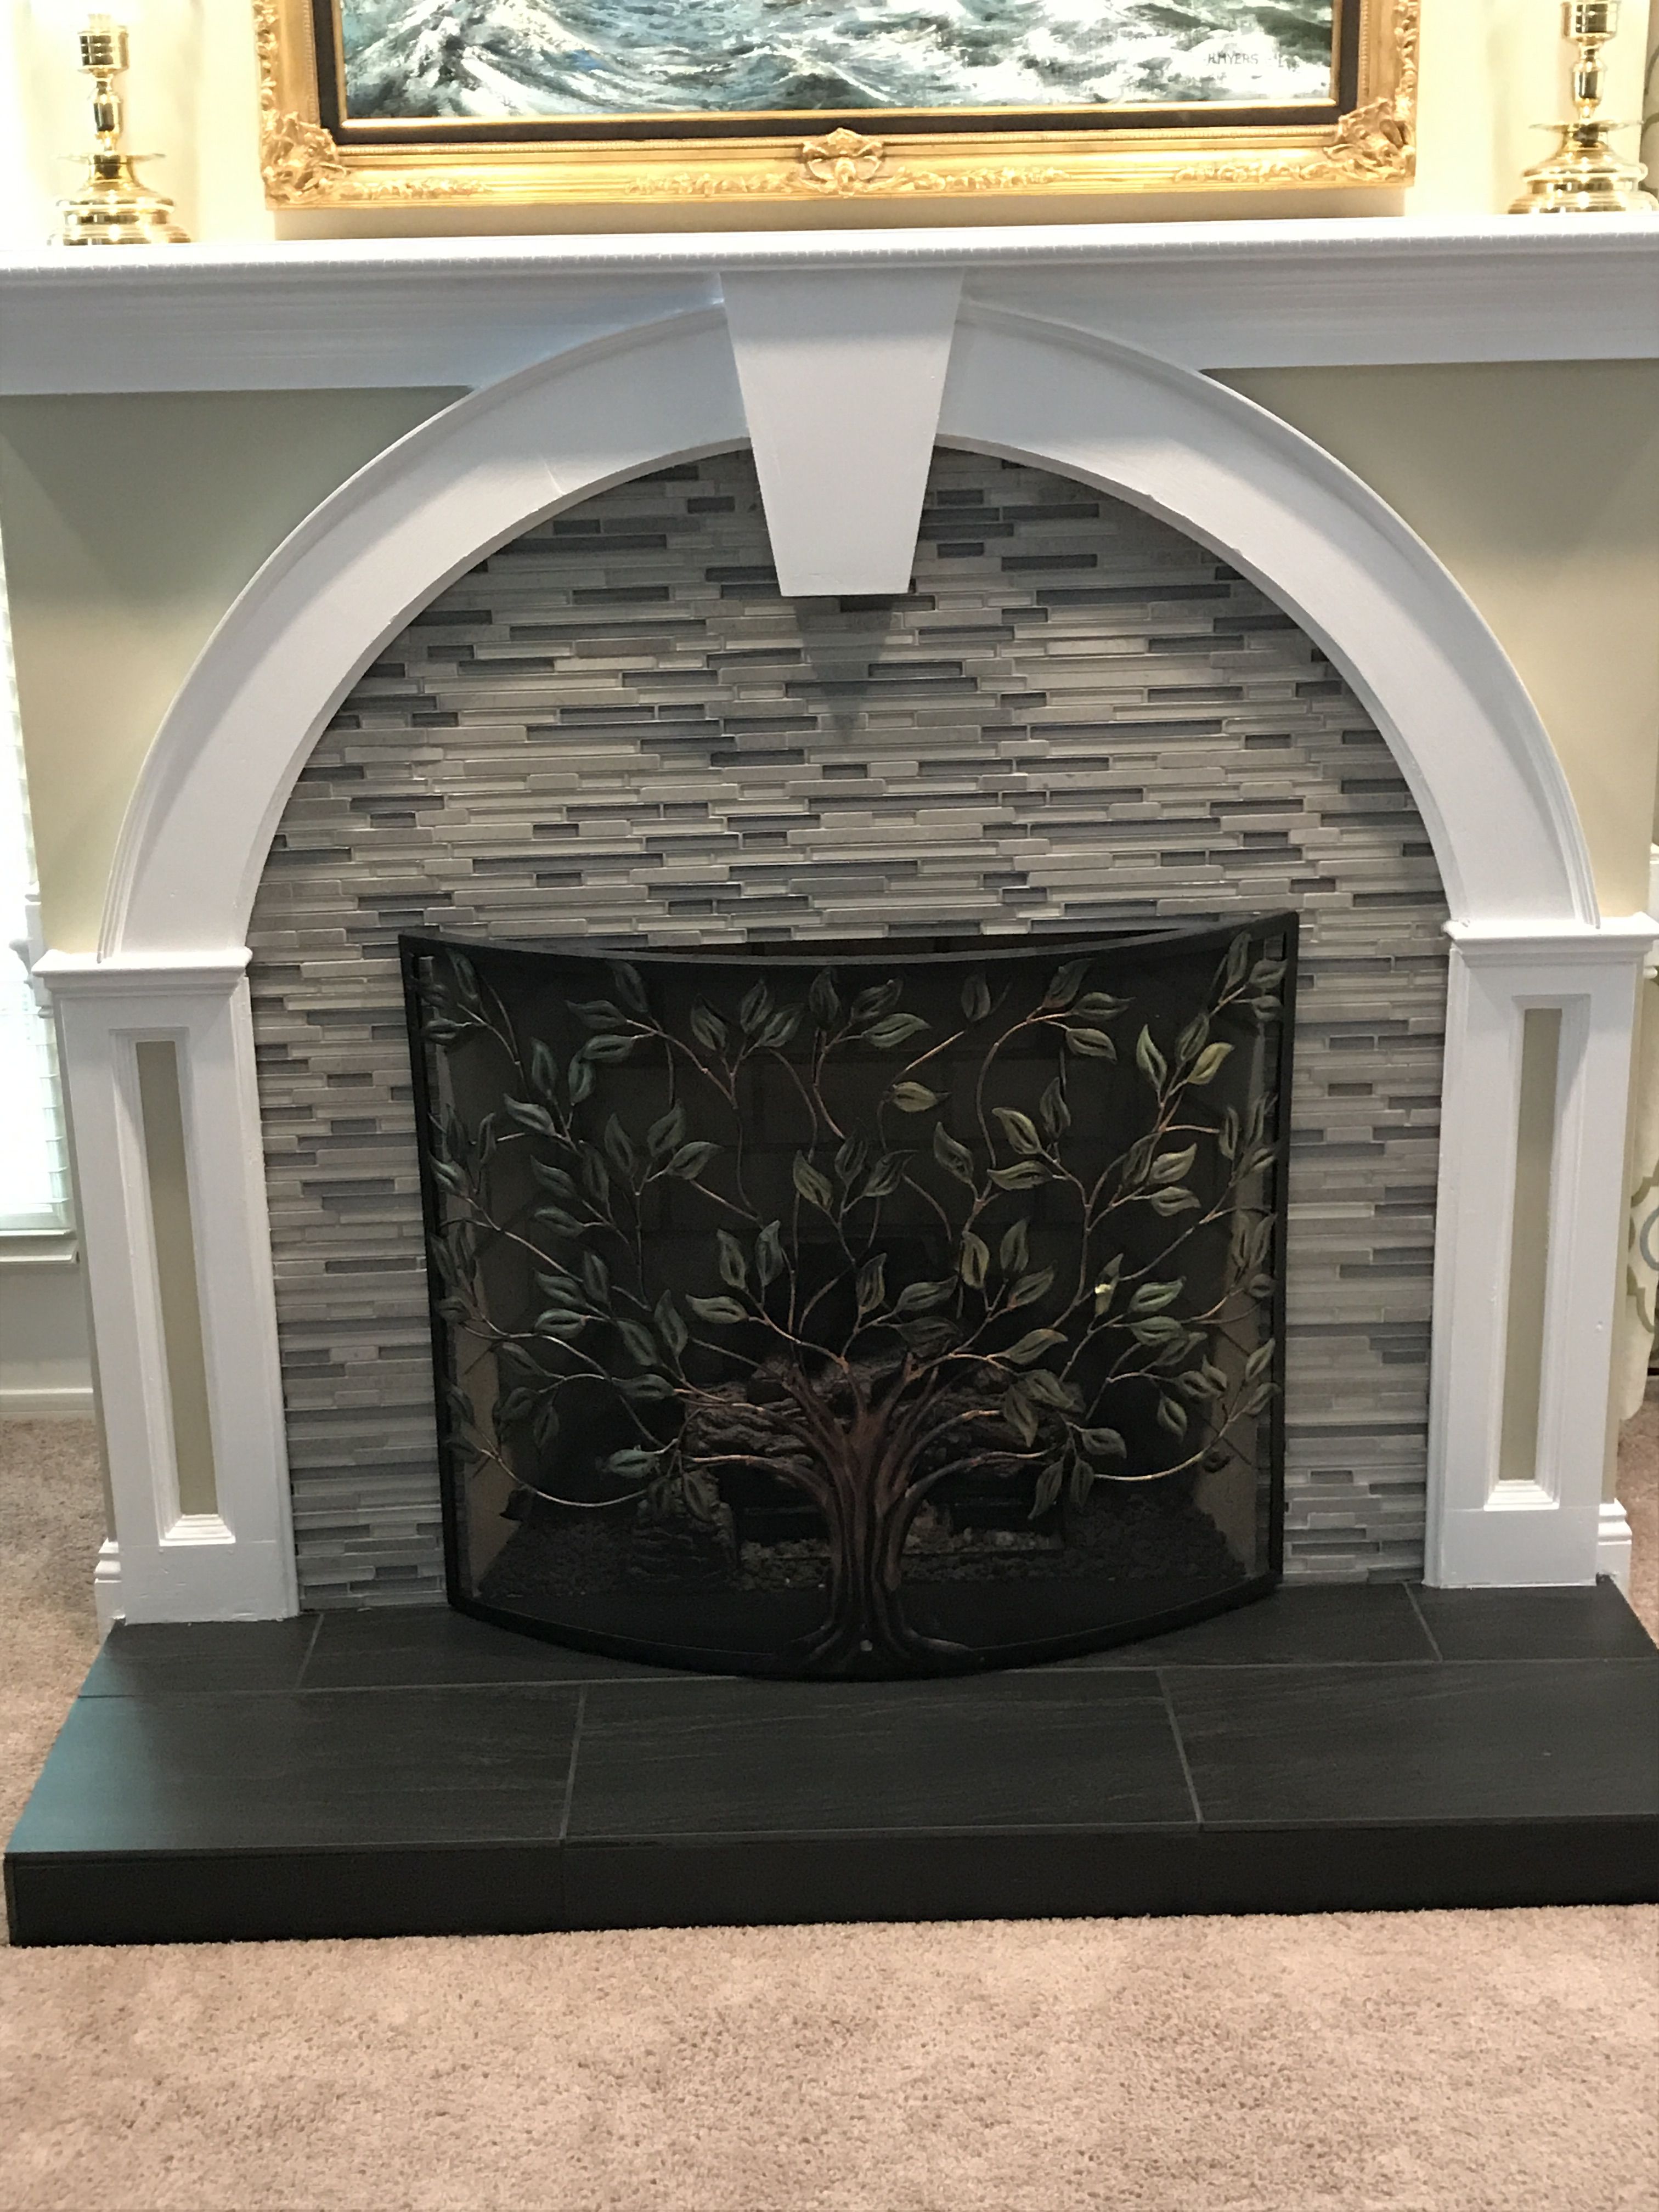 Slate Tile Fireplace Surround Inspirational after Using Arlington Stria Glass and Stone Wall Tile for